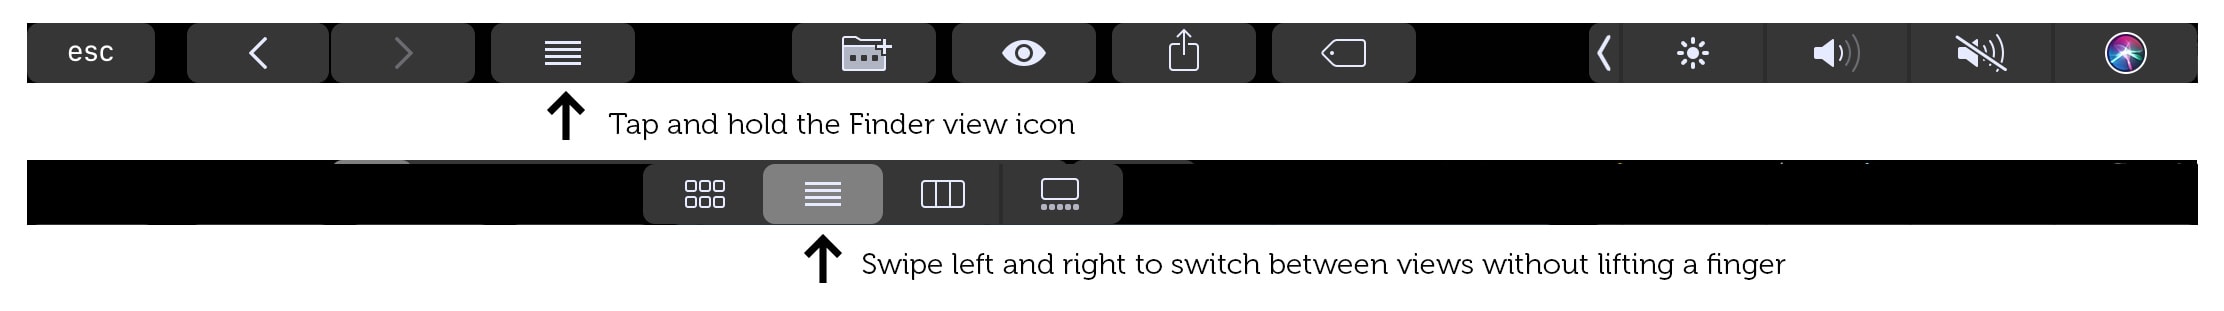 Switch between Finder views without lifting a finger